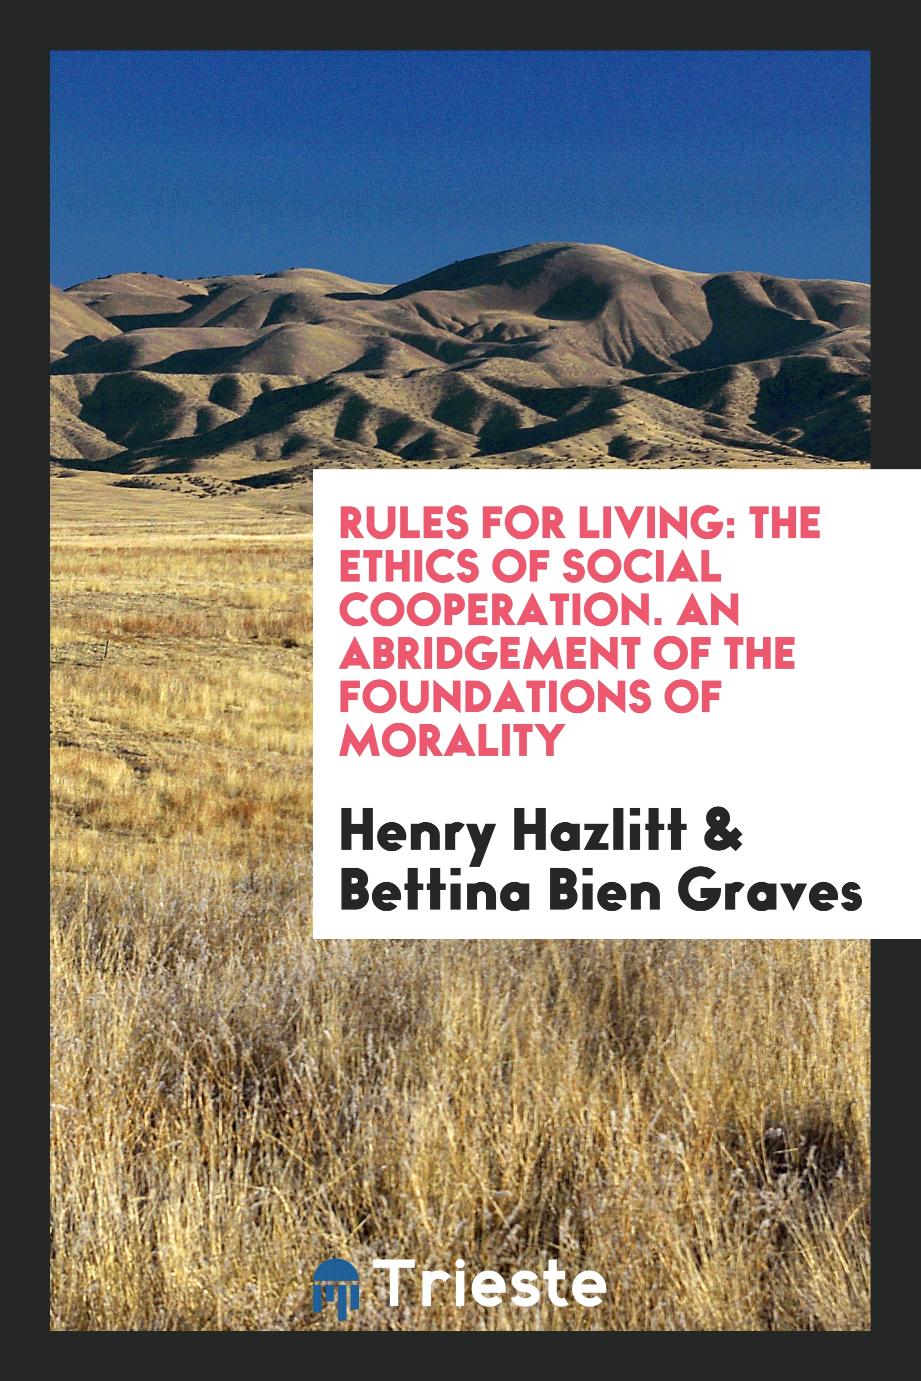 Rules for Living: The Ethics of Social Cooperation. An Abridgement of the Foundations of Morality